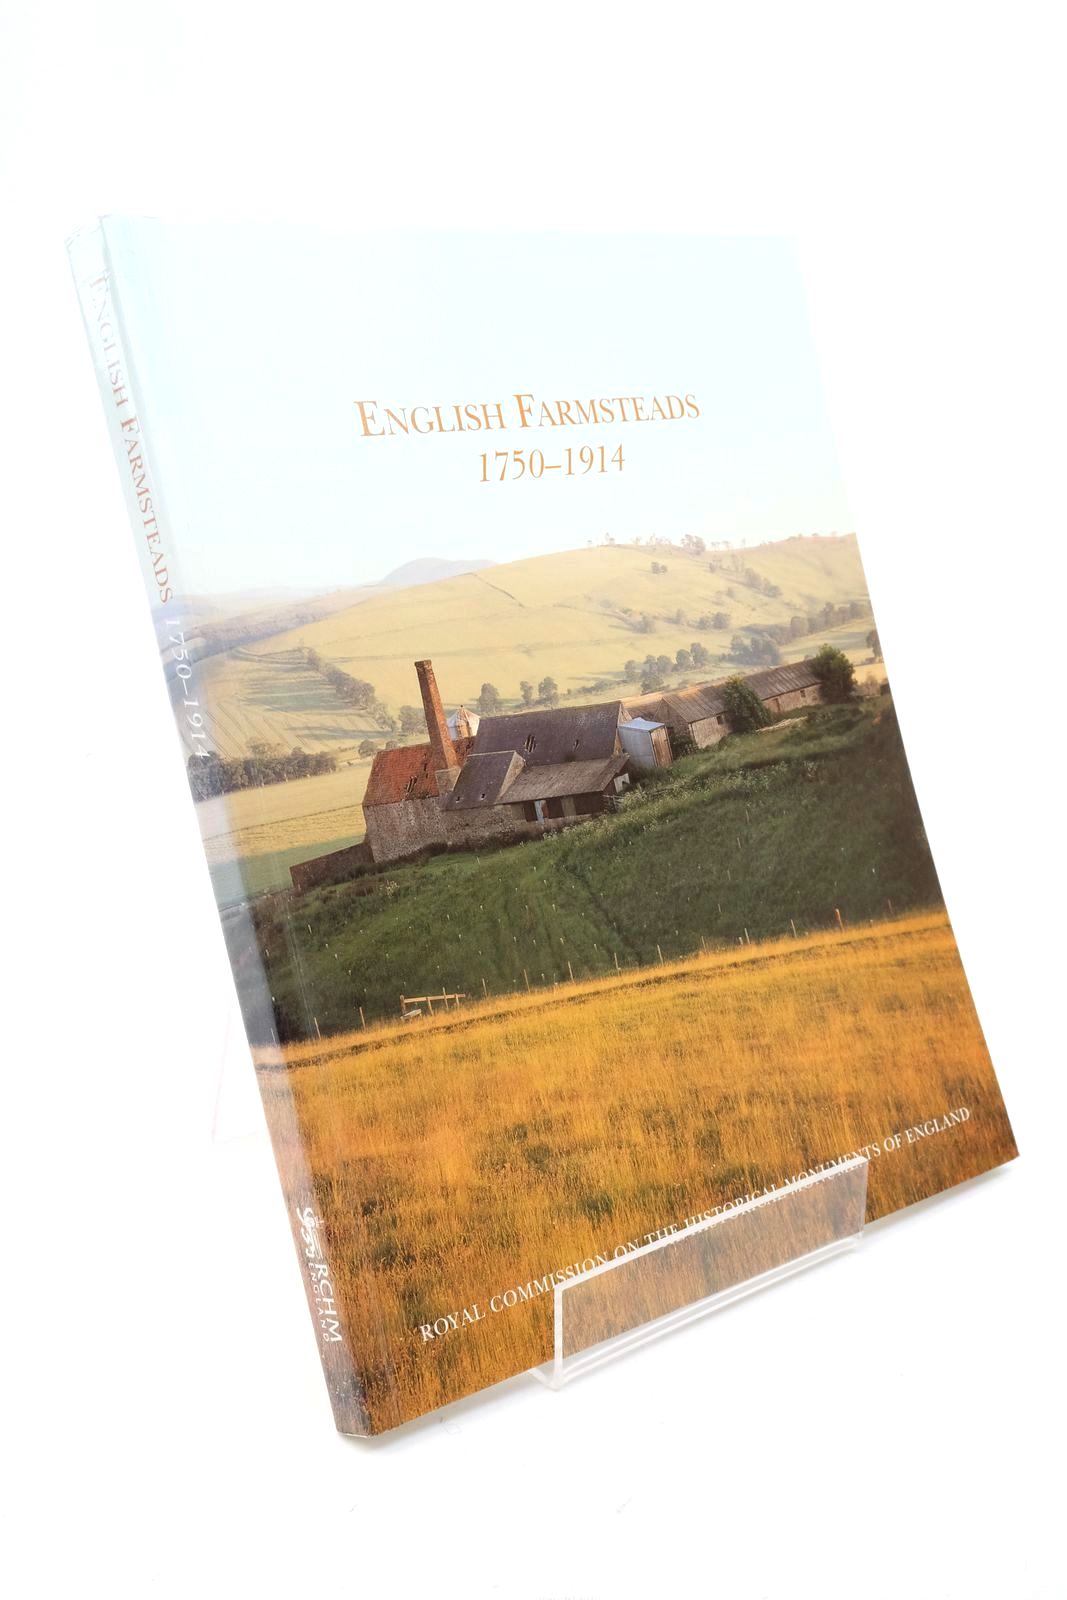 Photo of ENGLISH FARMSTEADS 1750-1914 written by Barnwell, P.S.
Giles, Colum illustrated by Adams, A.T. published by Royal Commission On The Historical Monuments Of England (STOCK CODE: 1322468)  for sale by Stella & Rose's Books